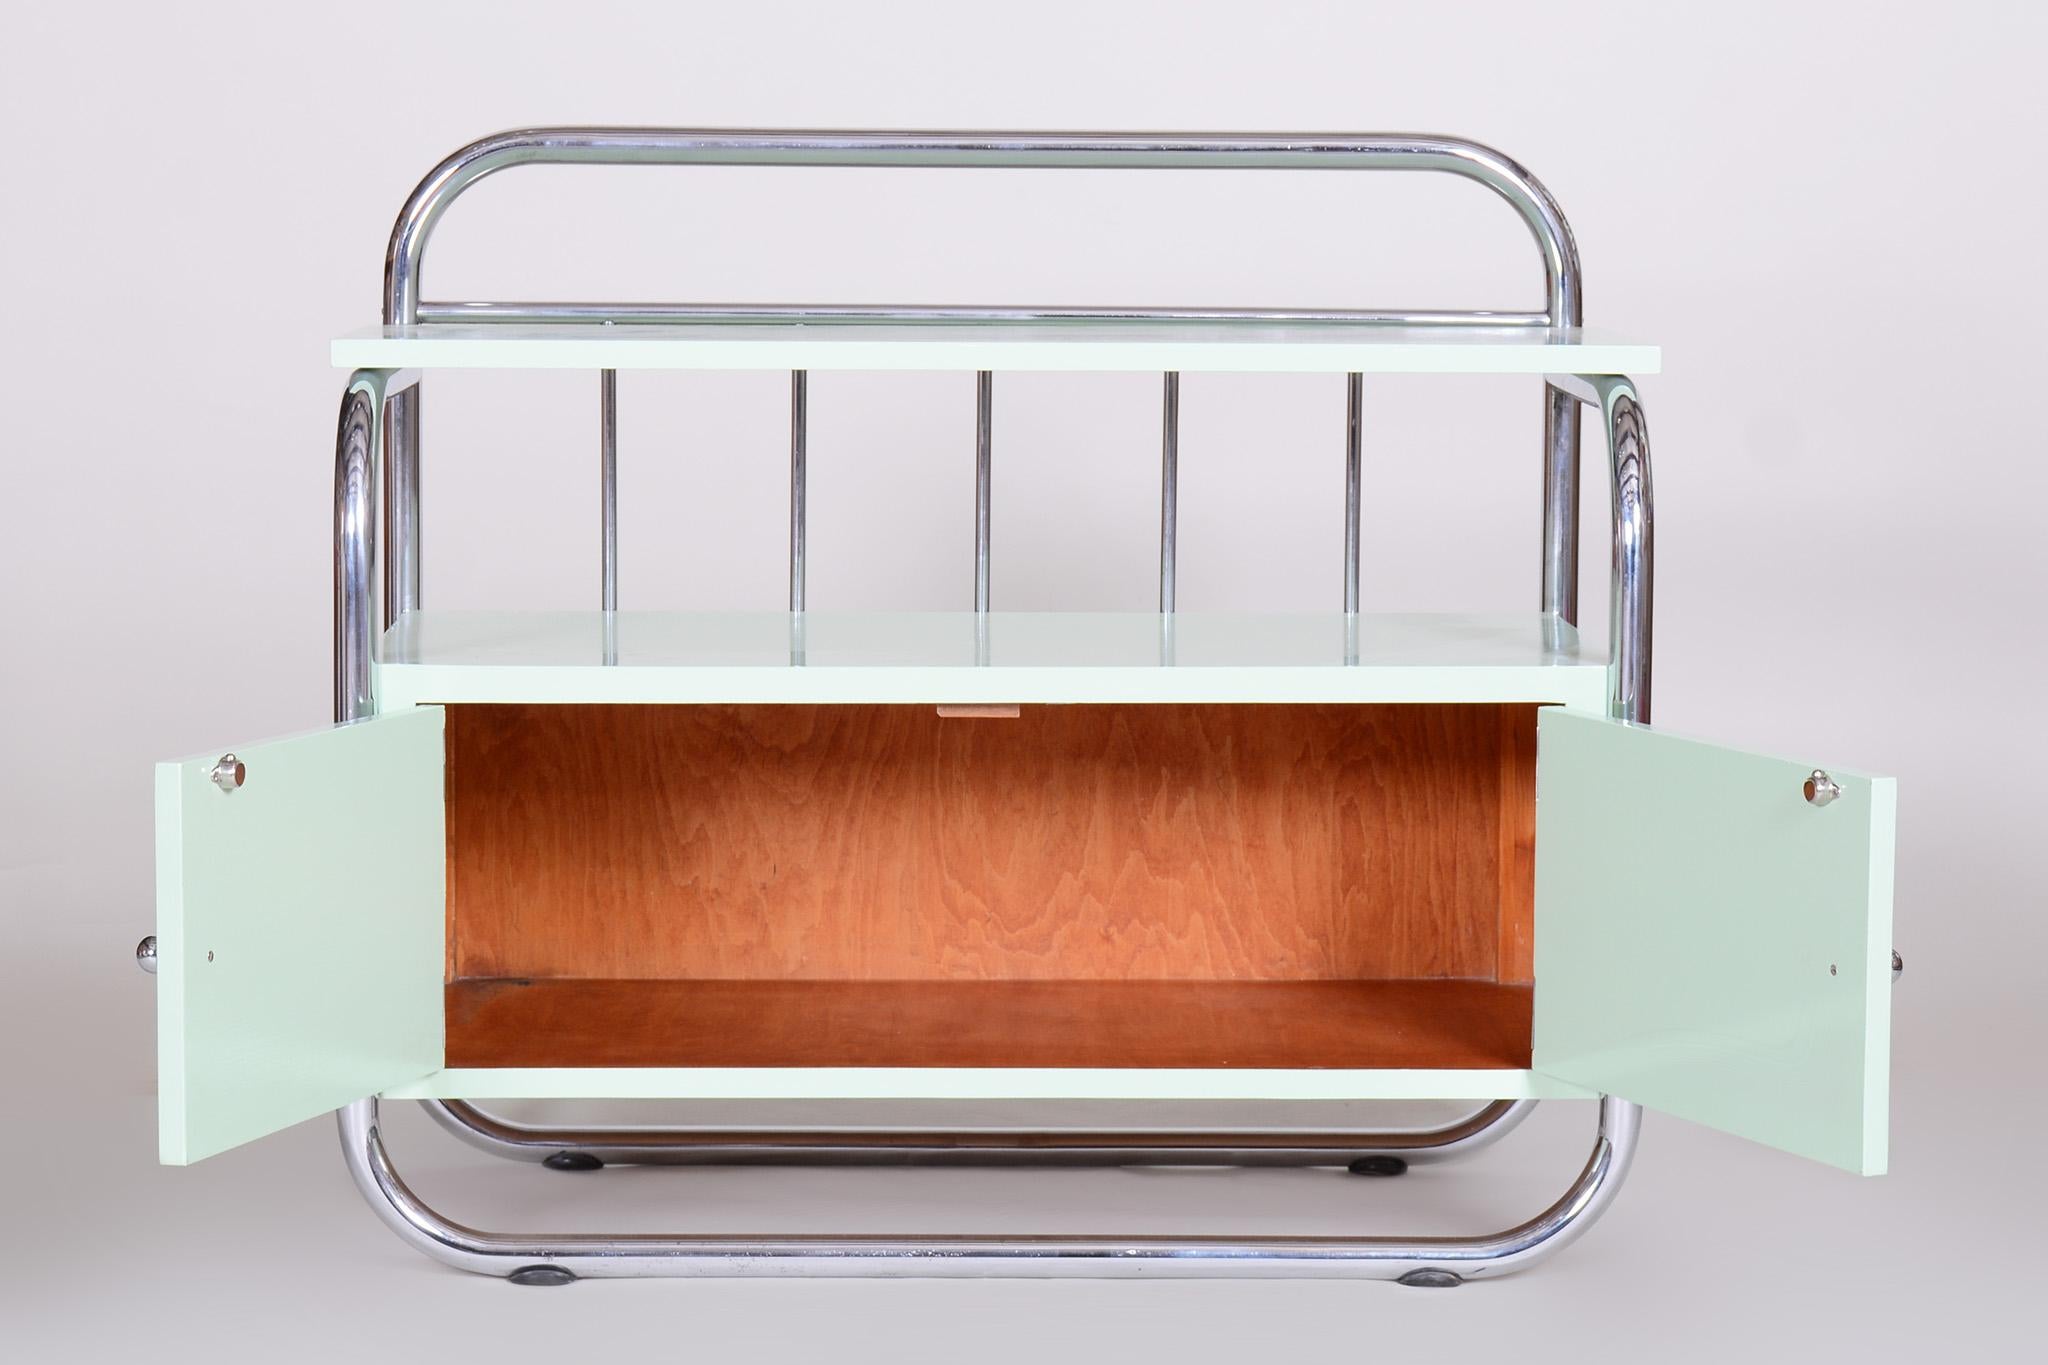 Restored Small Bauhaus Cabinet, Chrome-Plated Steel, Wood, Czechia, 1930s For Sale 3